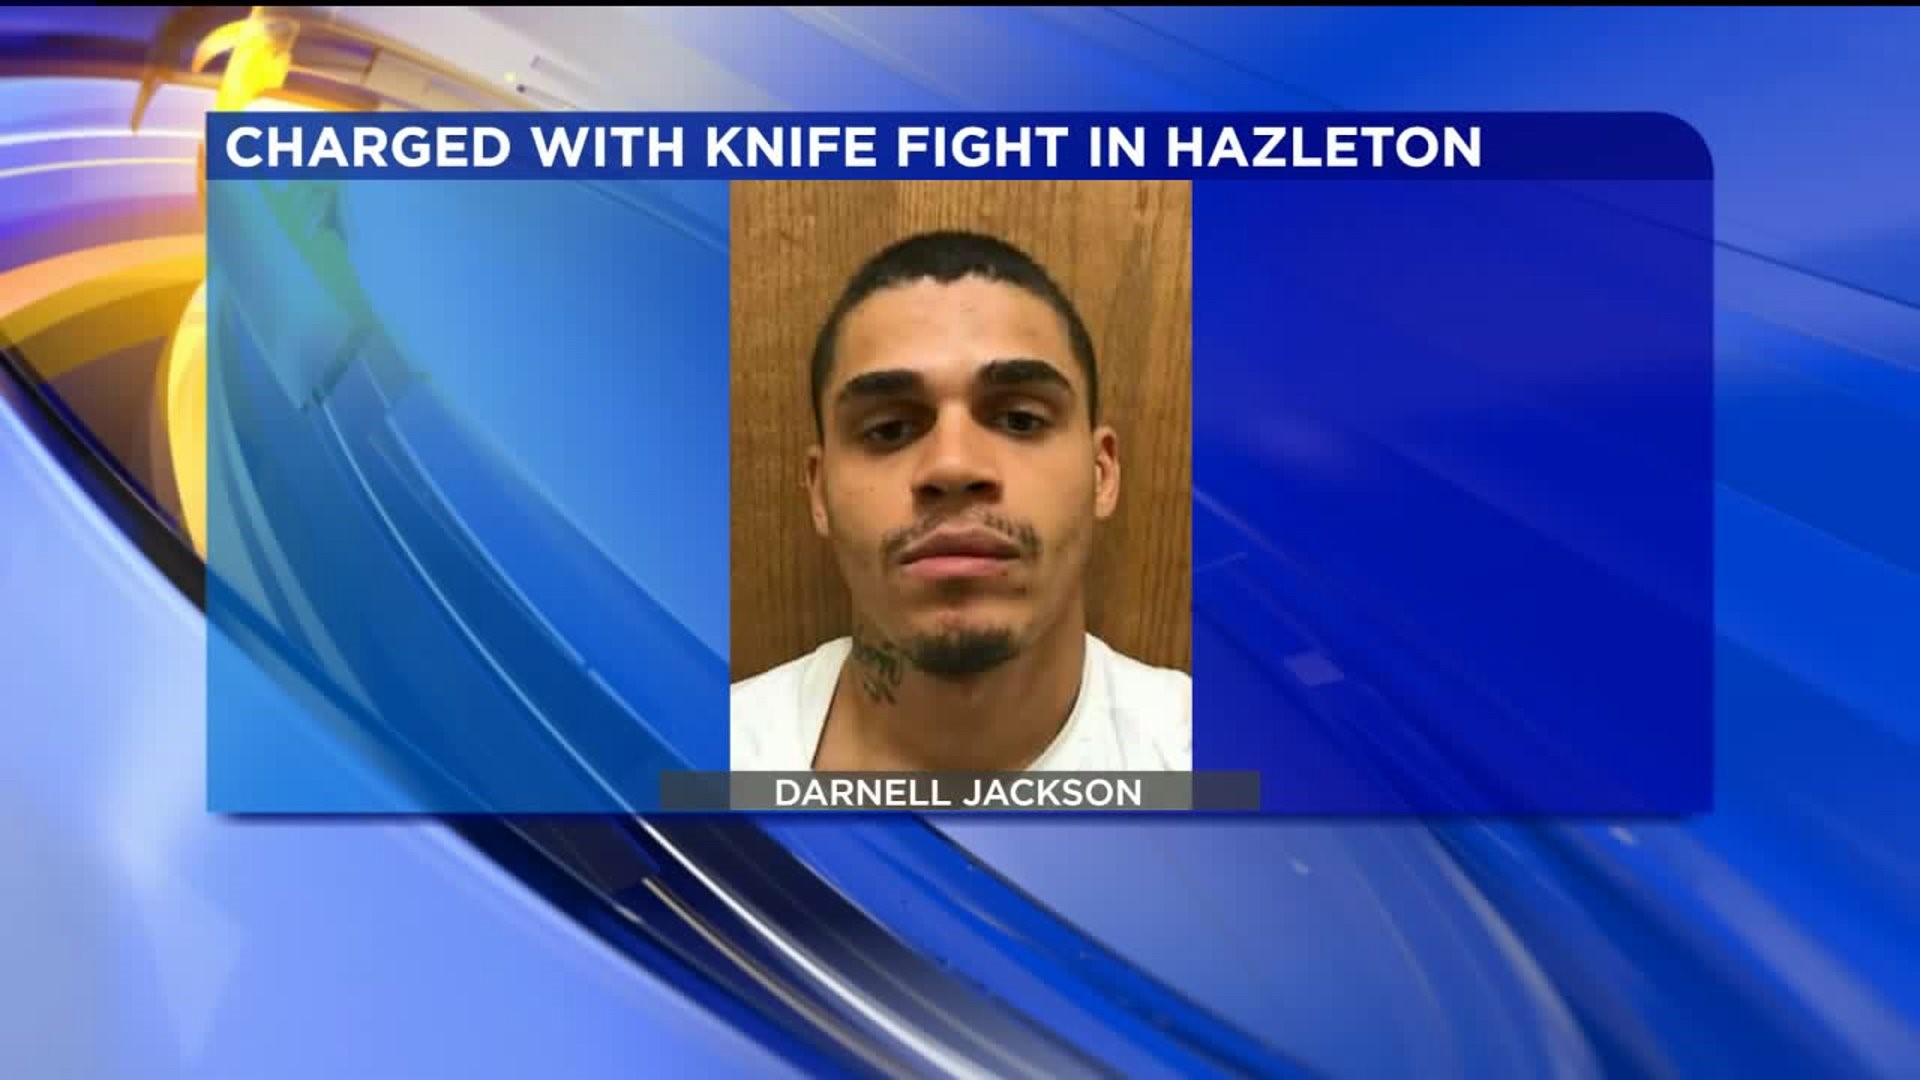 Man Charged After Knife Fight in Hazleton